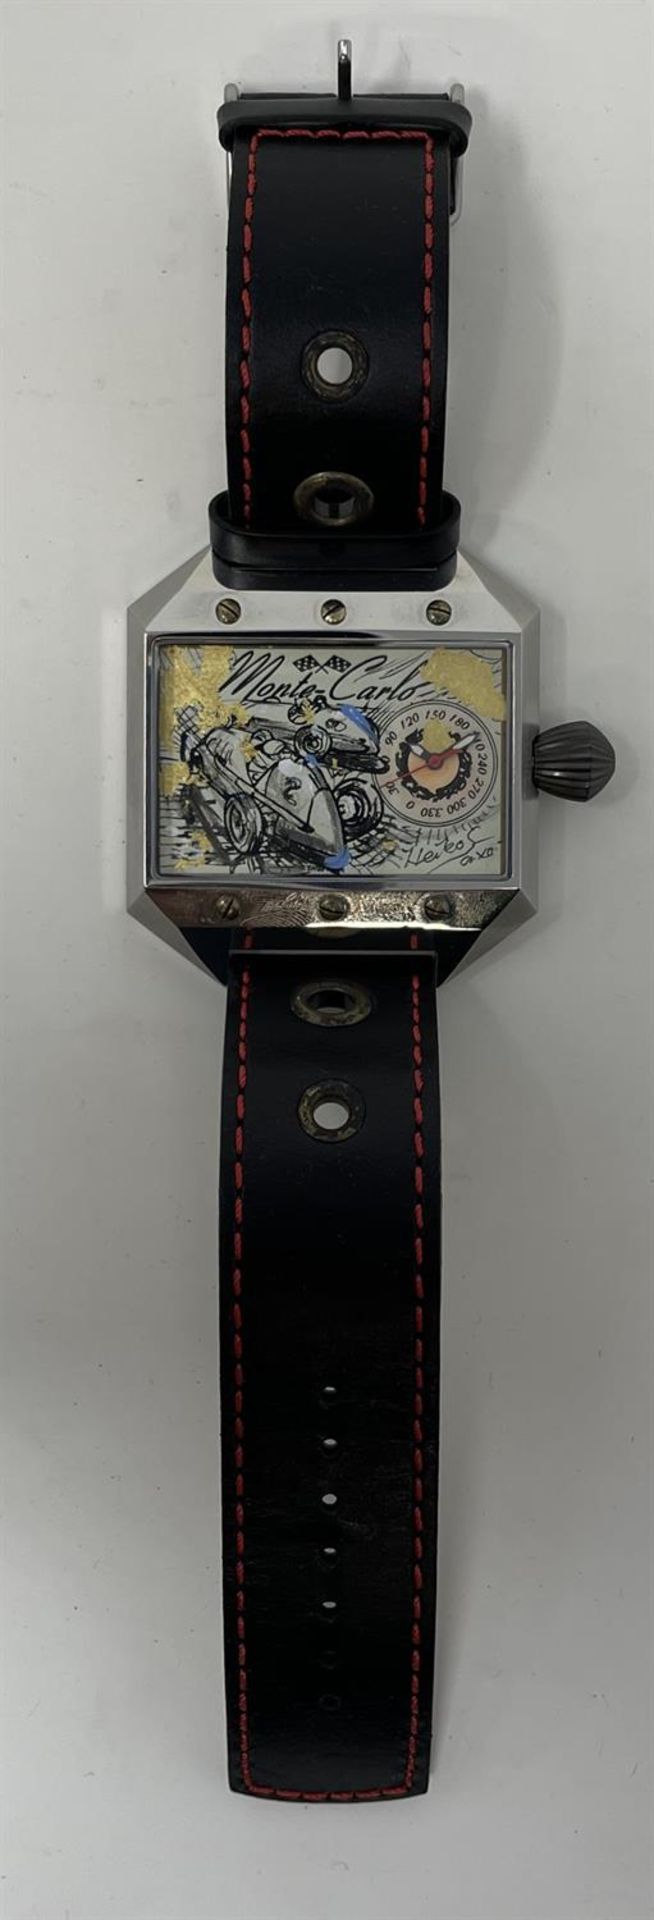 Heiko Saxo Monte Carlo Limited Edition Wristwatch with Unique Hand-Painted Face - Image 8 of 10